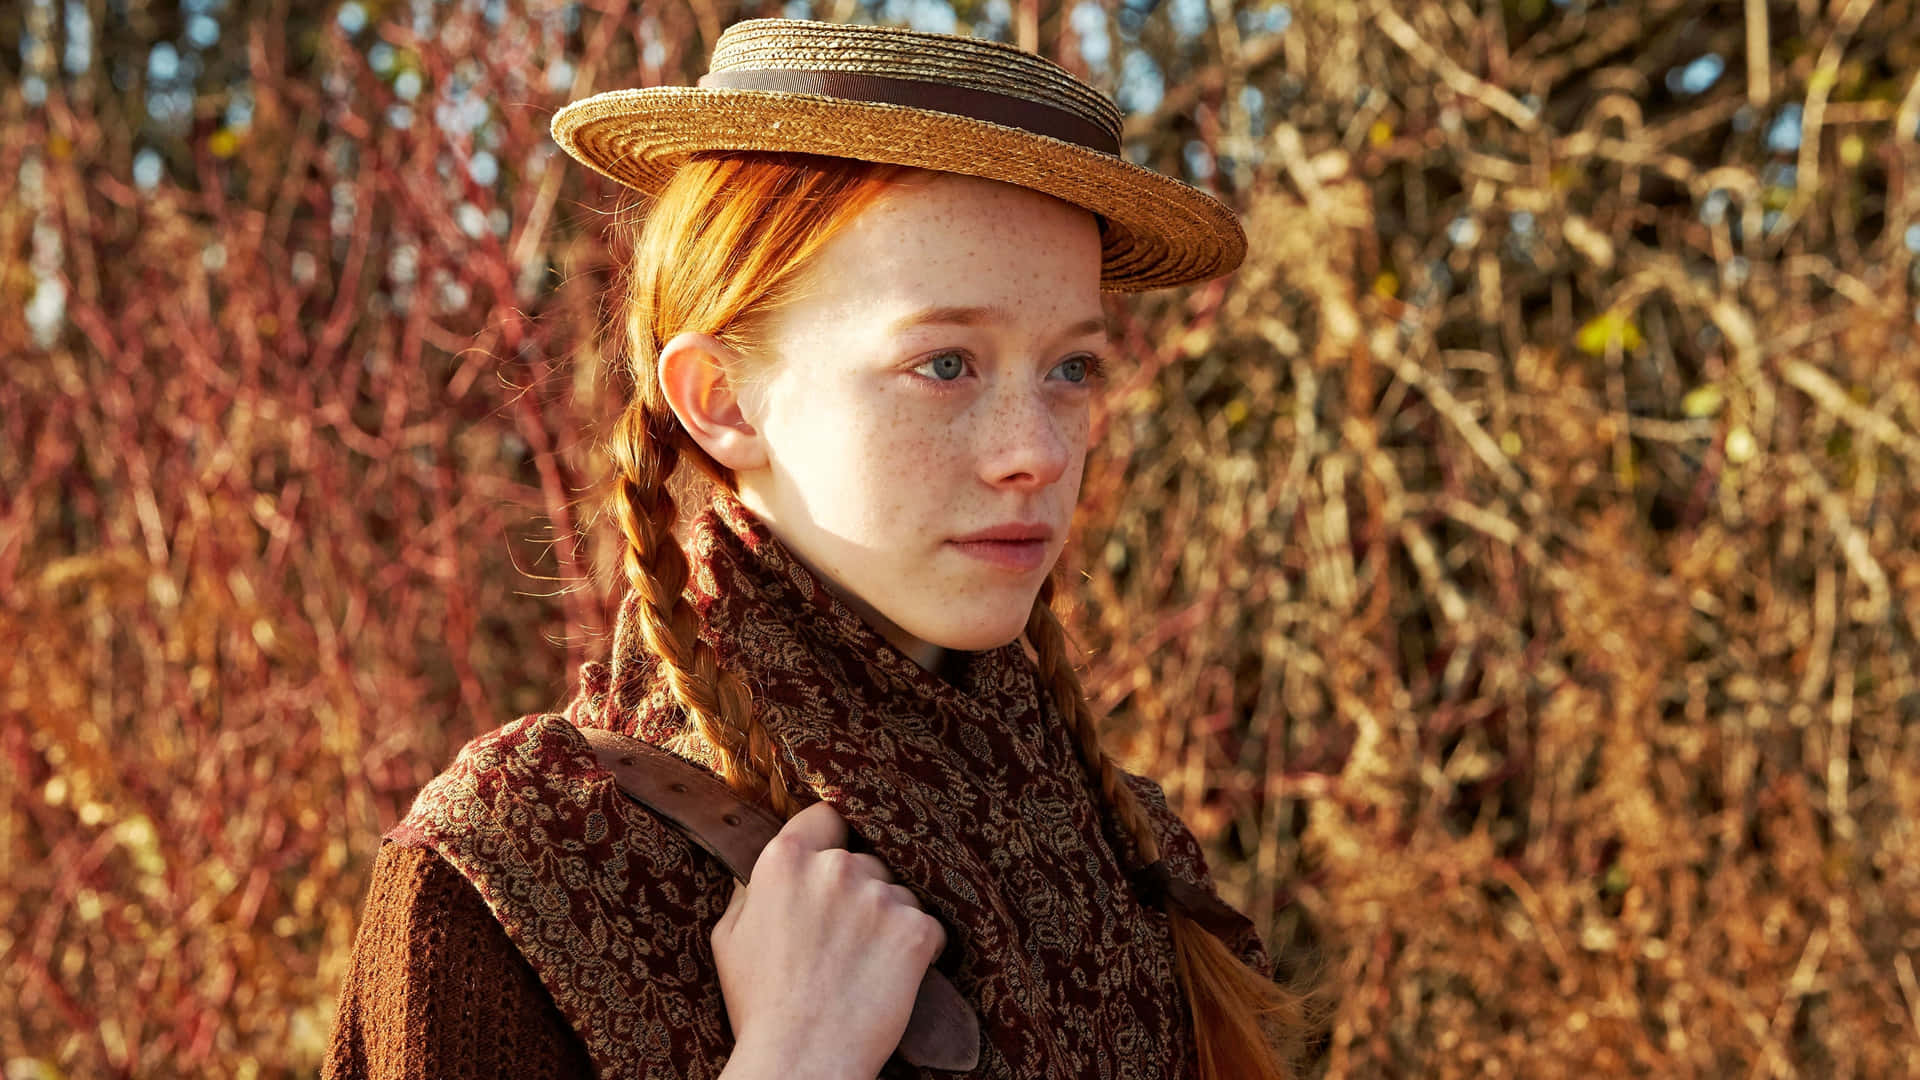 A Young Girl In A Brown Hat Is Standing In A Field